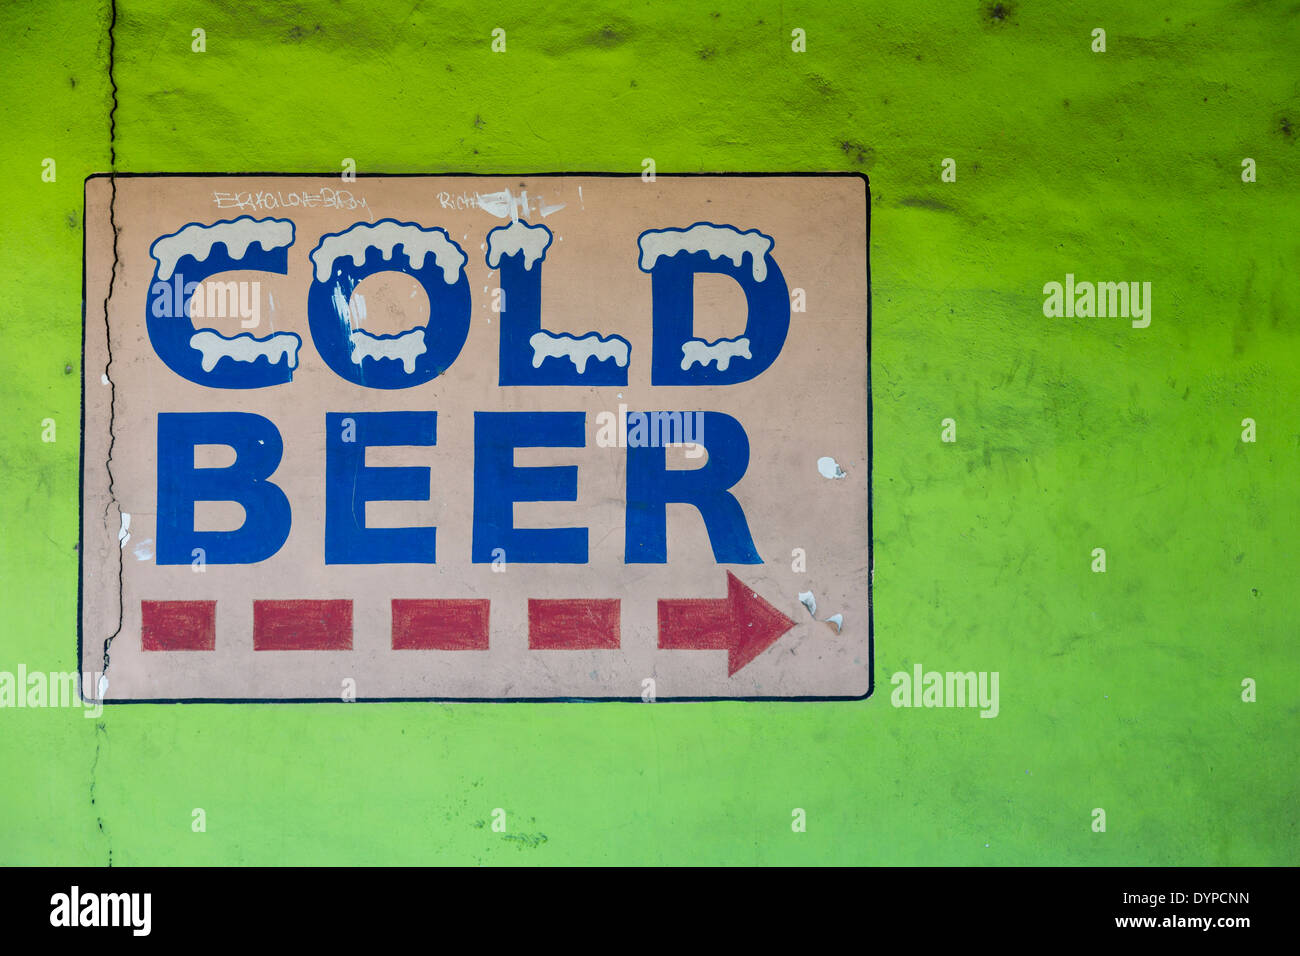 Cold Beer Sign in Angeles City, Luzon, Philippines Stock Photo